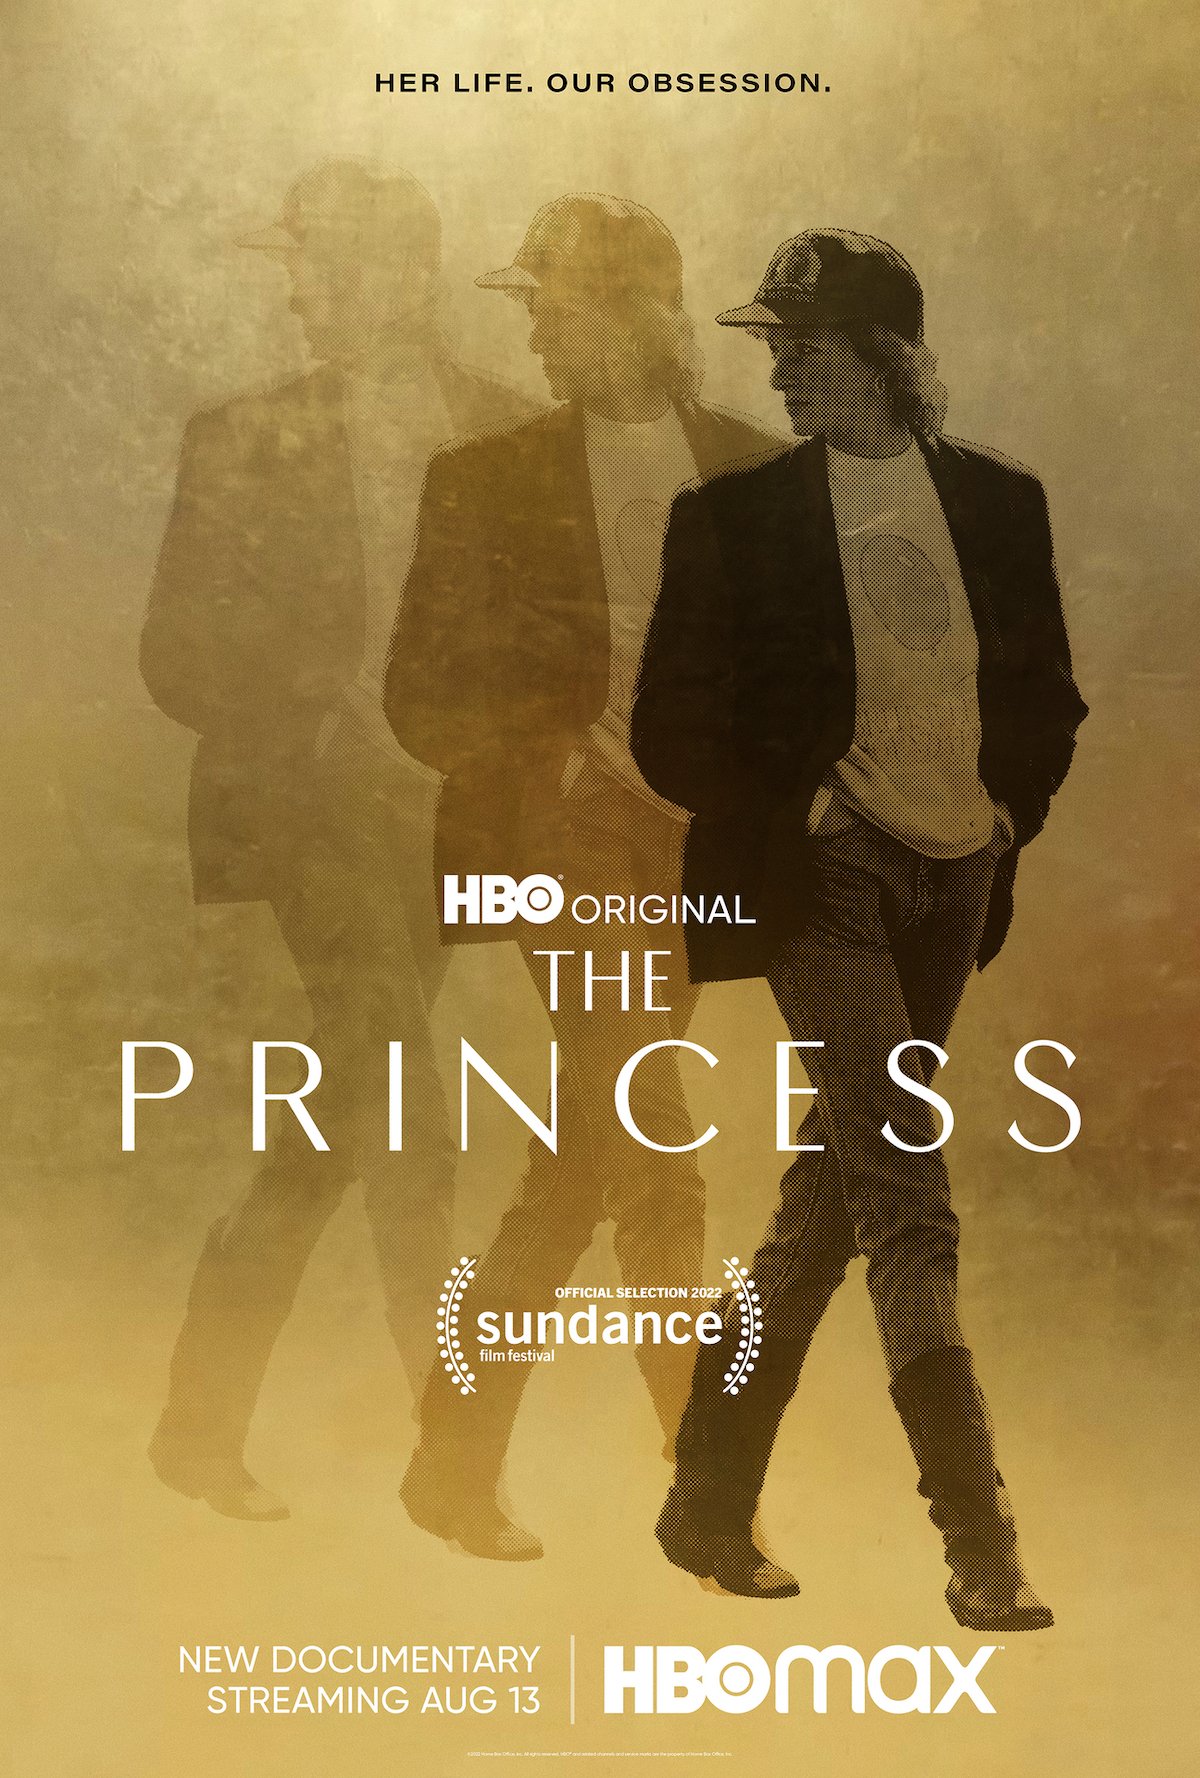 'The Princess' poster for the Princess Diana documentary from HBO